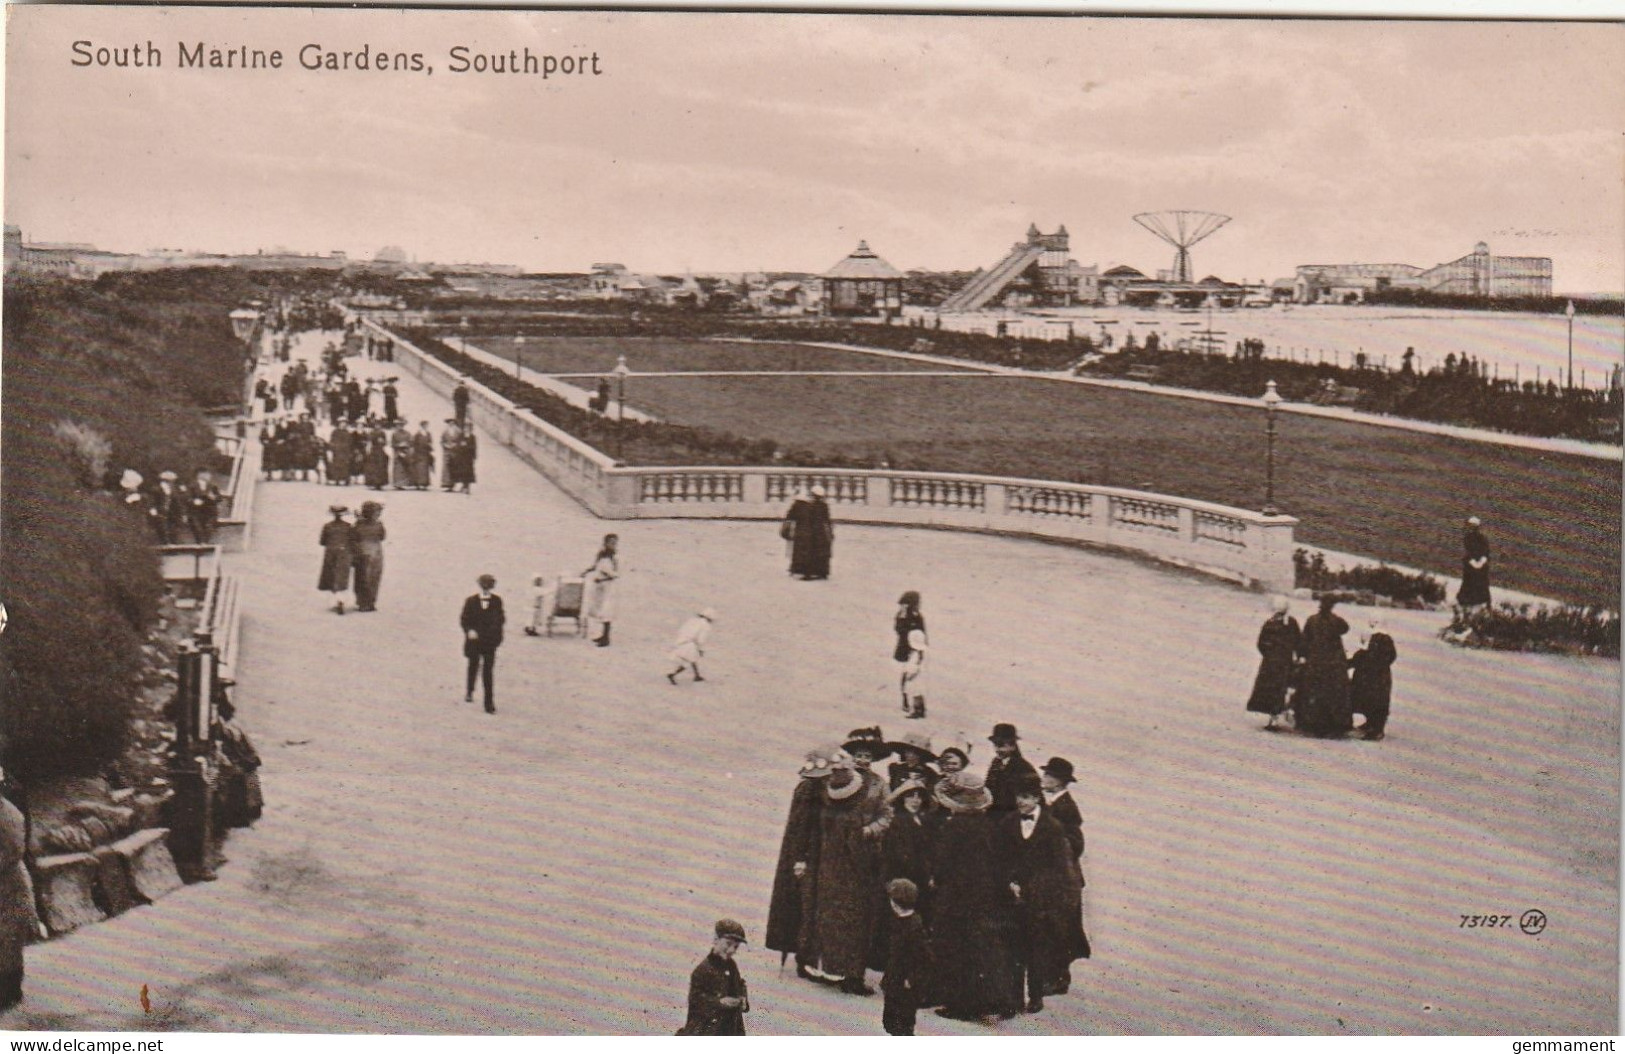 SOUTHPORT - SOUTH MARINE GARDENS - Southport